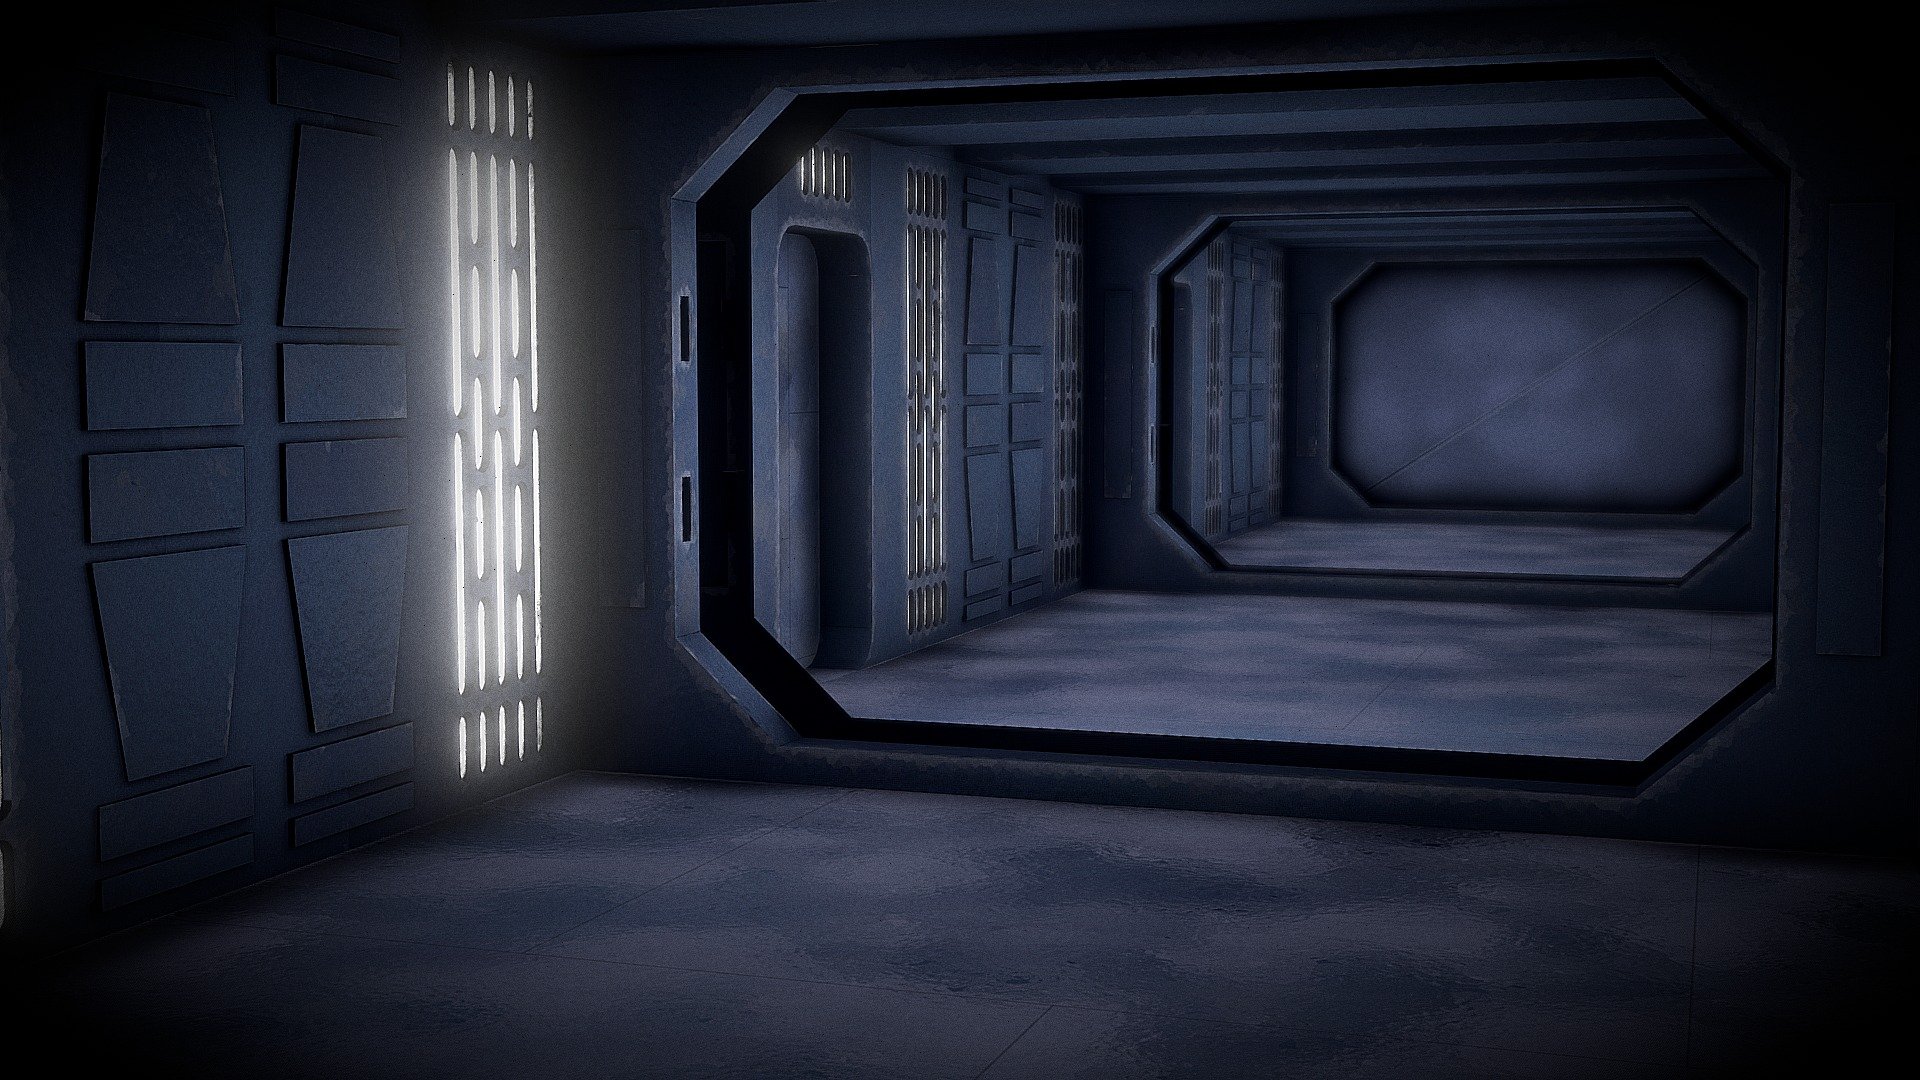 Hallway modeled after those found aboard Republic and later Imperial ships in the STAR WARS galaxy. Notably, these hallways follow a consistent design aesthetic featuring lights in the walls, notched in a standardized pattern, and blast door cutouts 3d model